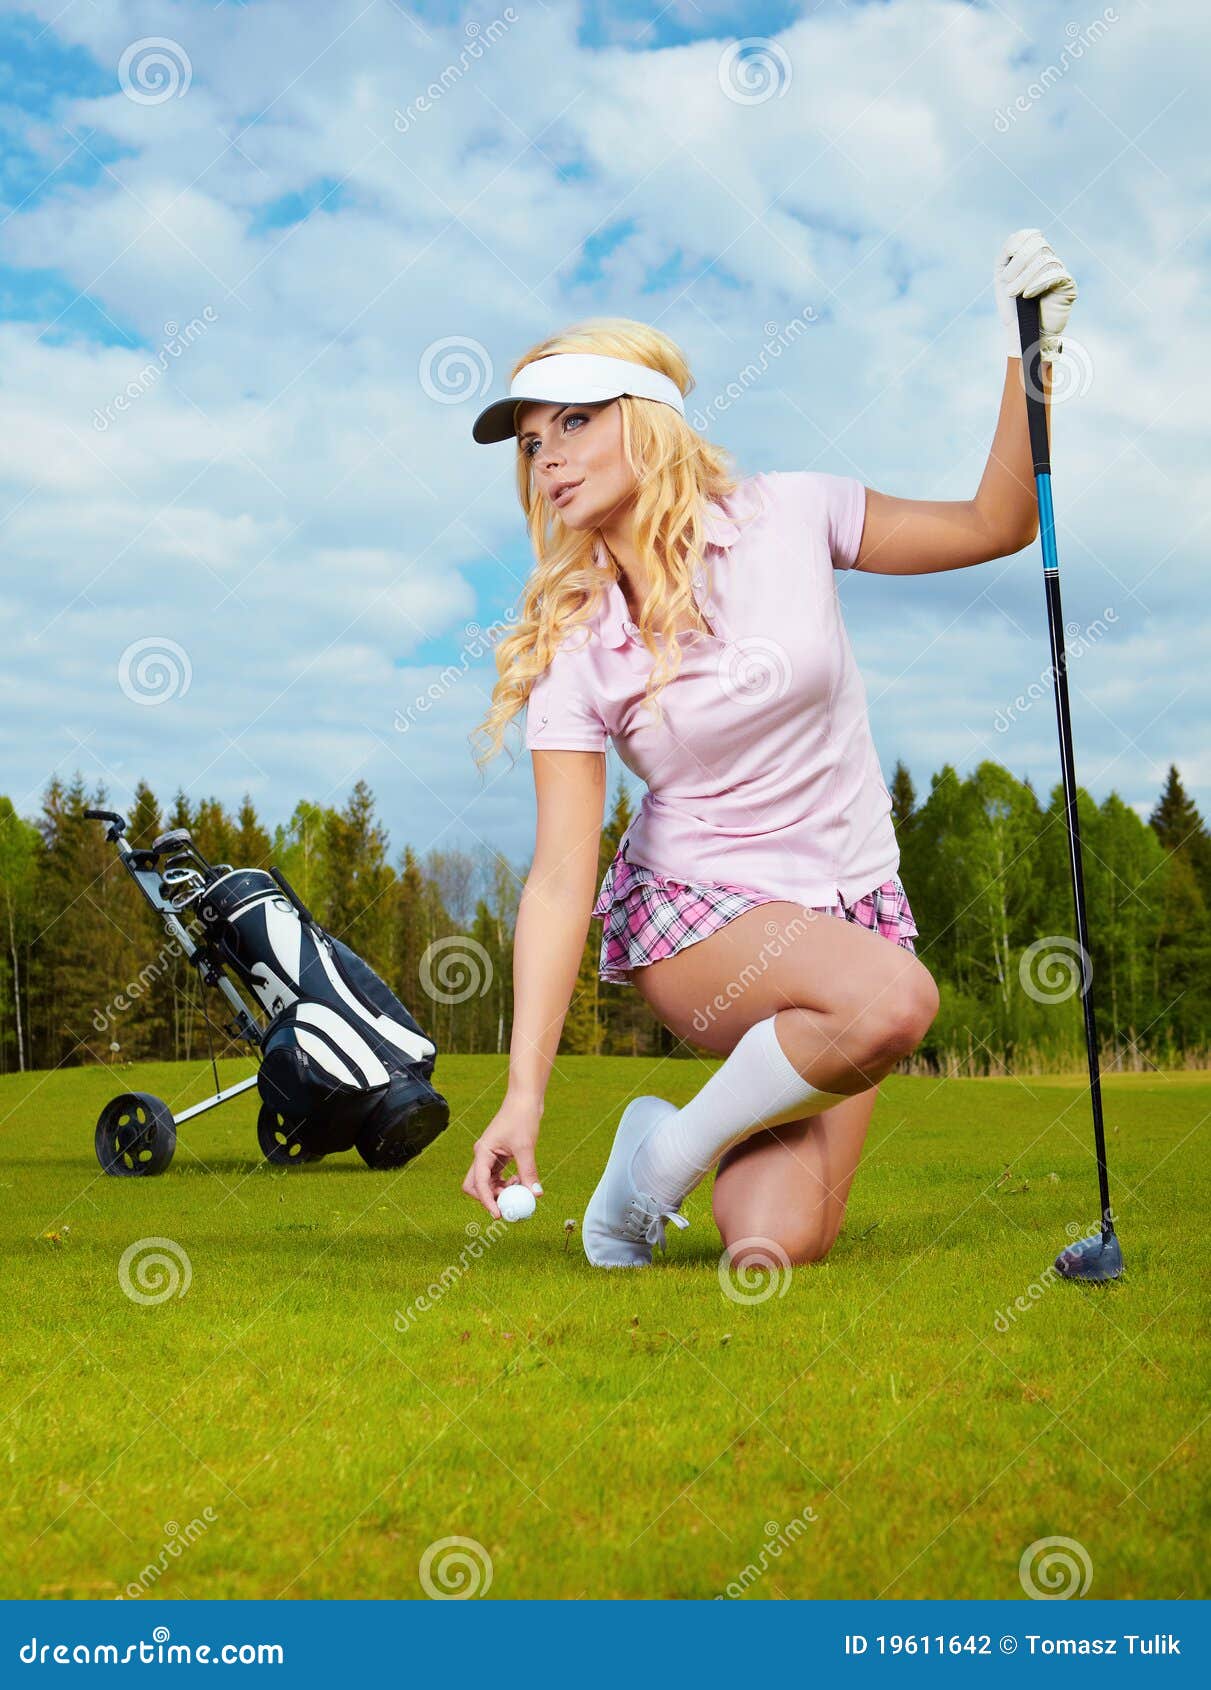 Blonde Girl Play Golf Stock Photography Image 19611642 regarding Awesome along with Beautiful golfing girl with regard to Home